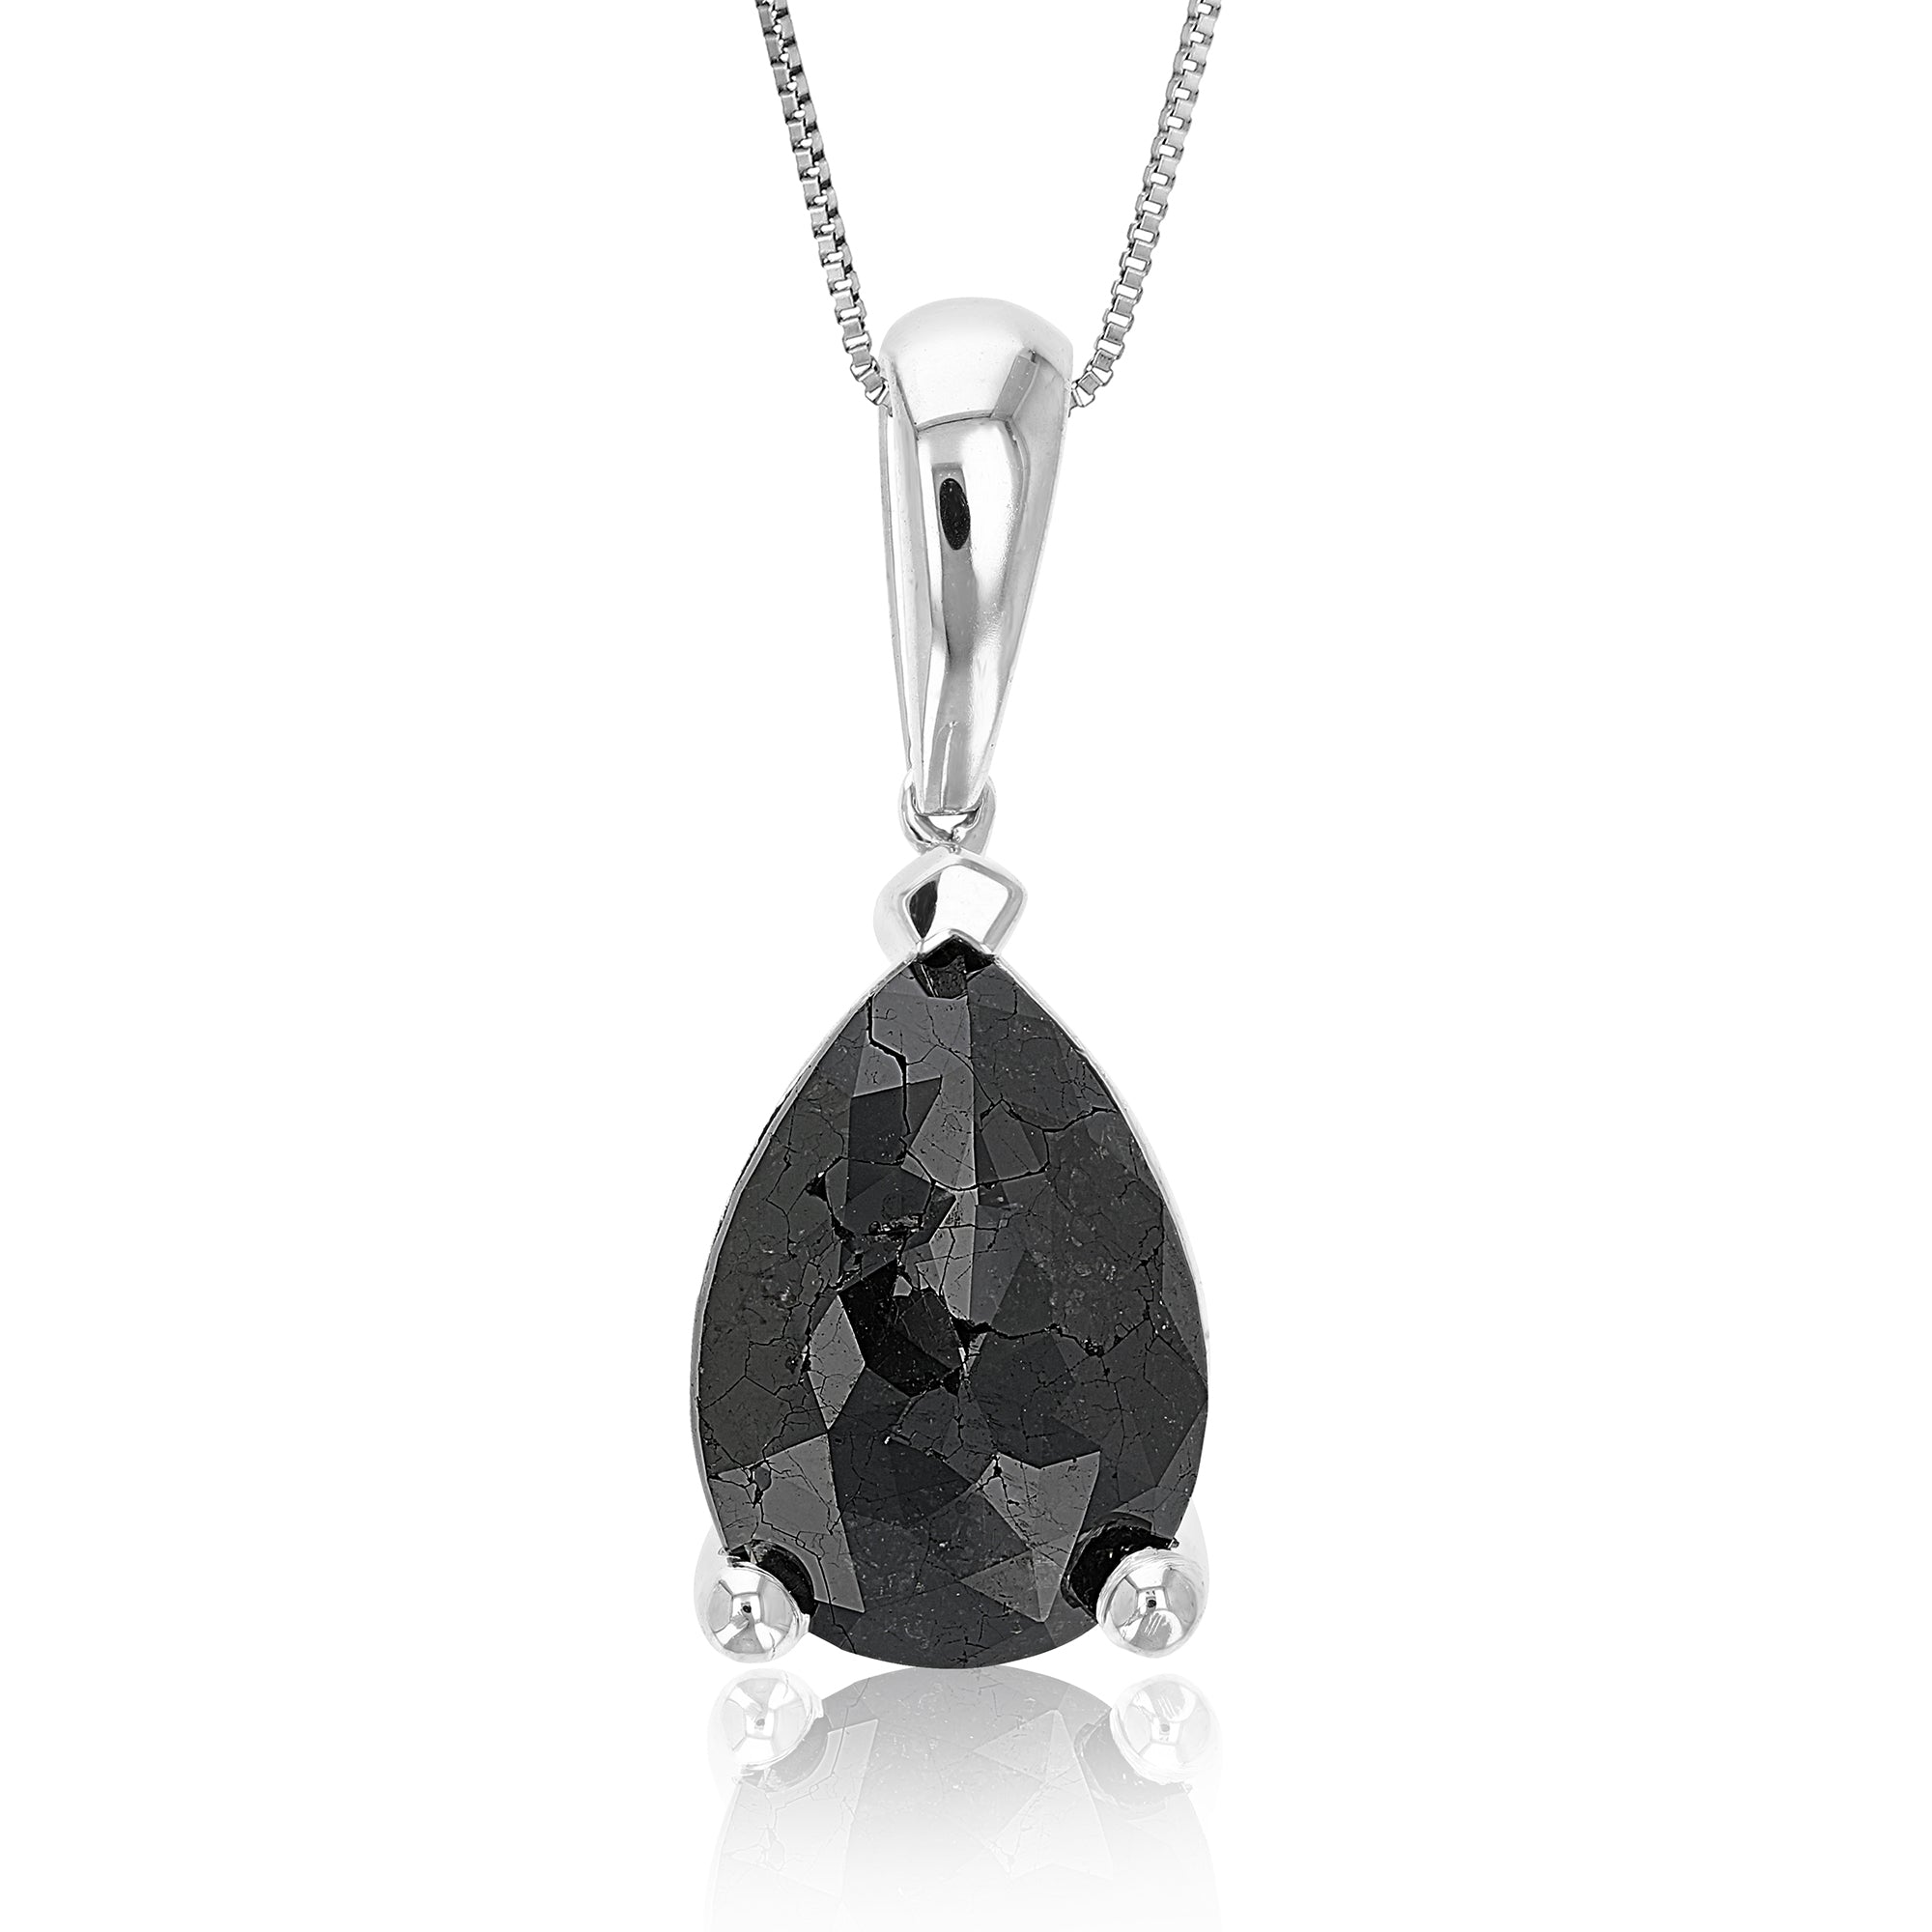 2.50 cttw Diamond Pendant, Black Diamond Pear Shape Pendant Necklace for Women in .925 Sterling Silver with 18 Inch Chain, Prong Setting